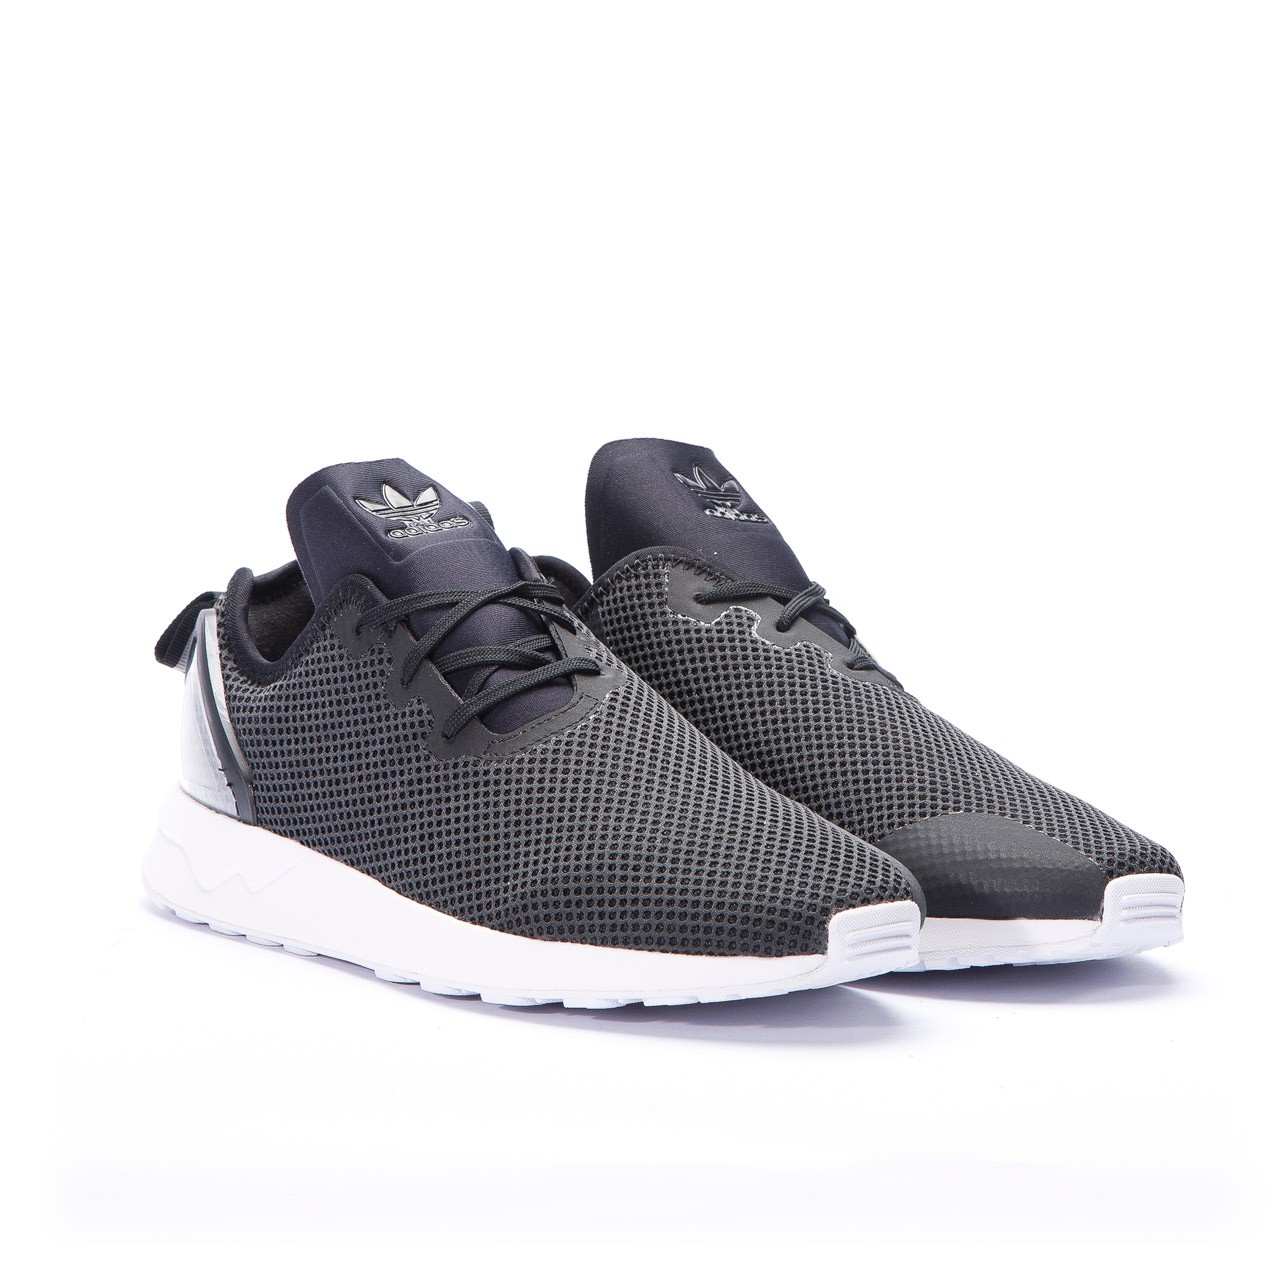 adidas zx flux adv homme france